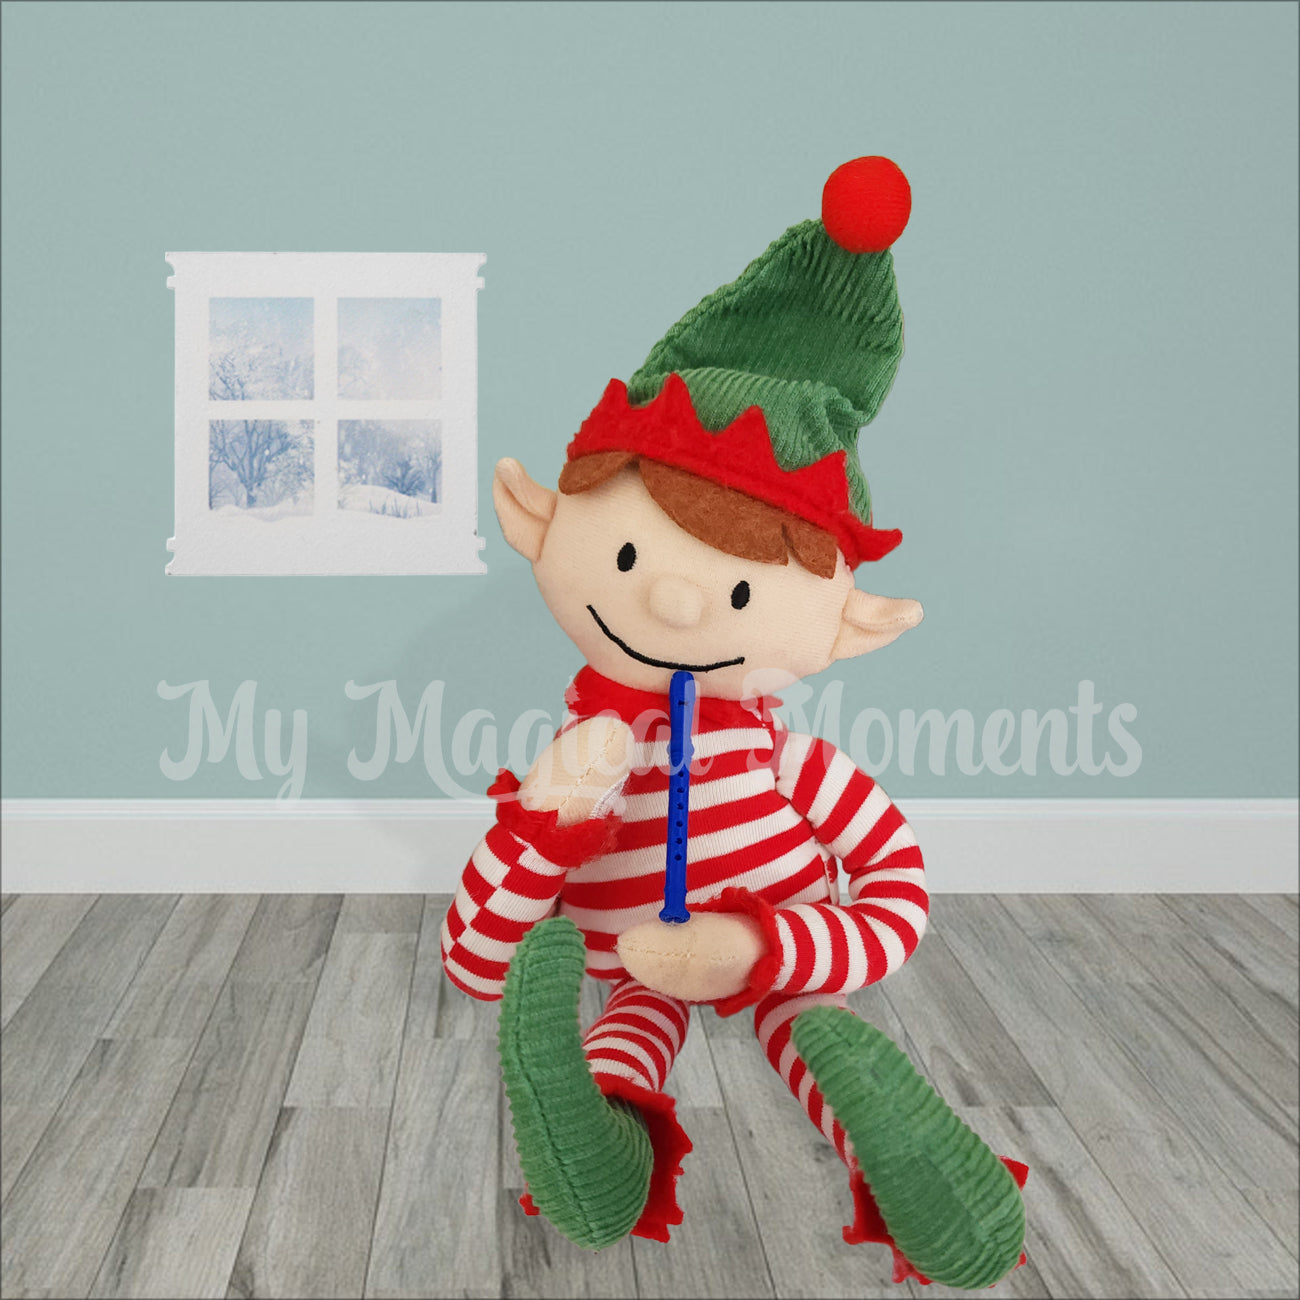 An Elf for Christmas sitting in a room playing a blue recorder elf prop